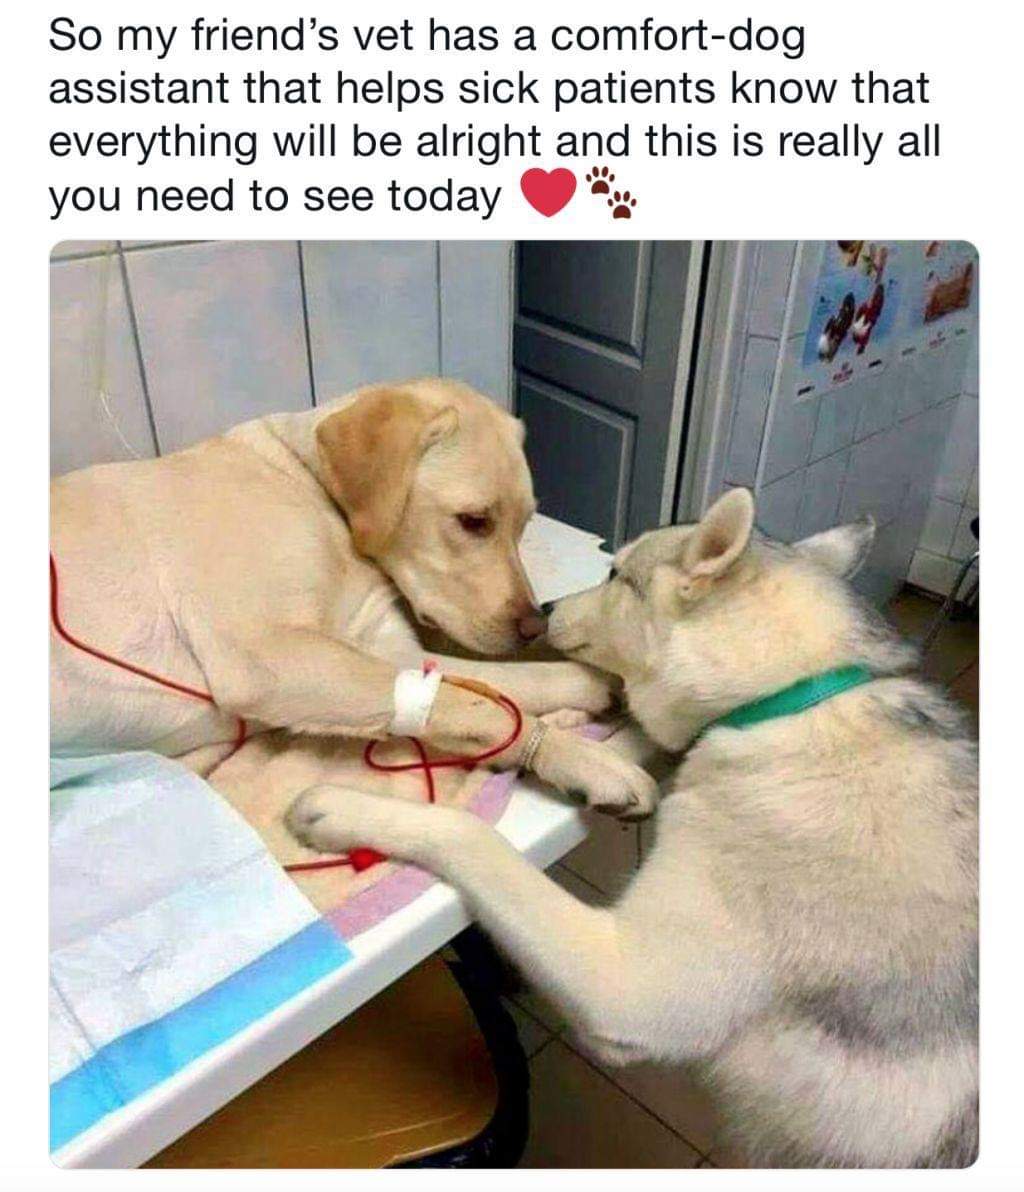 vet comfort dog - So my friend's vet has a comfortdog assistant that helps sick patients know that everything will be alright and this is really all you need to see today